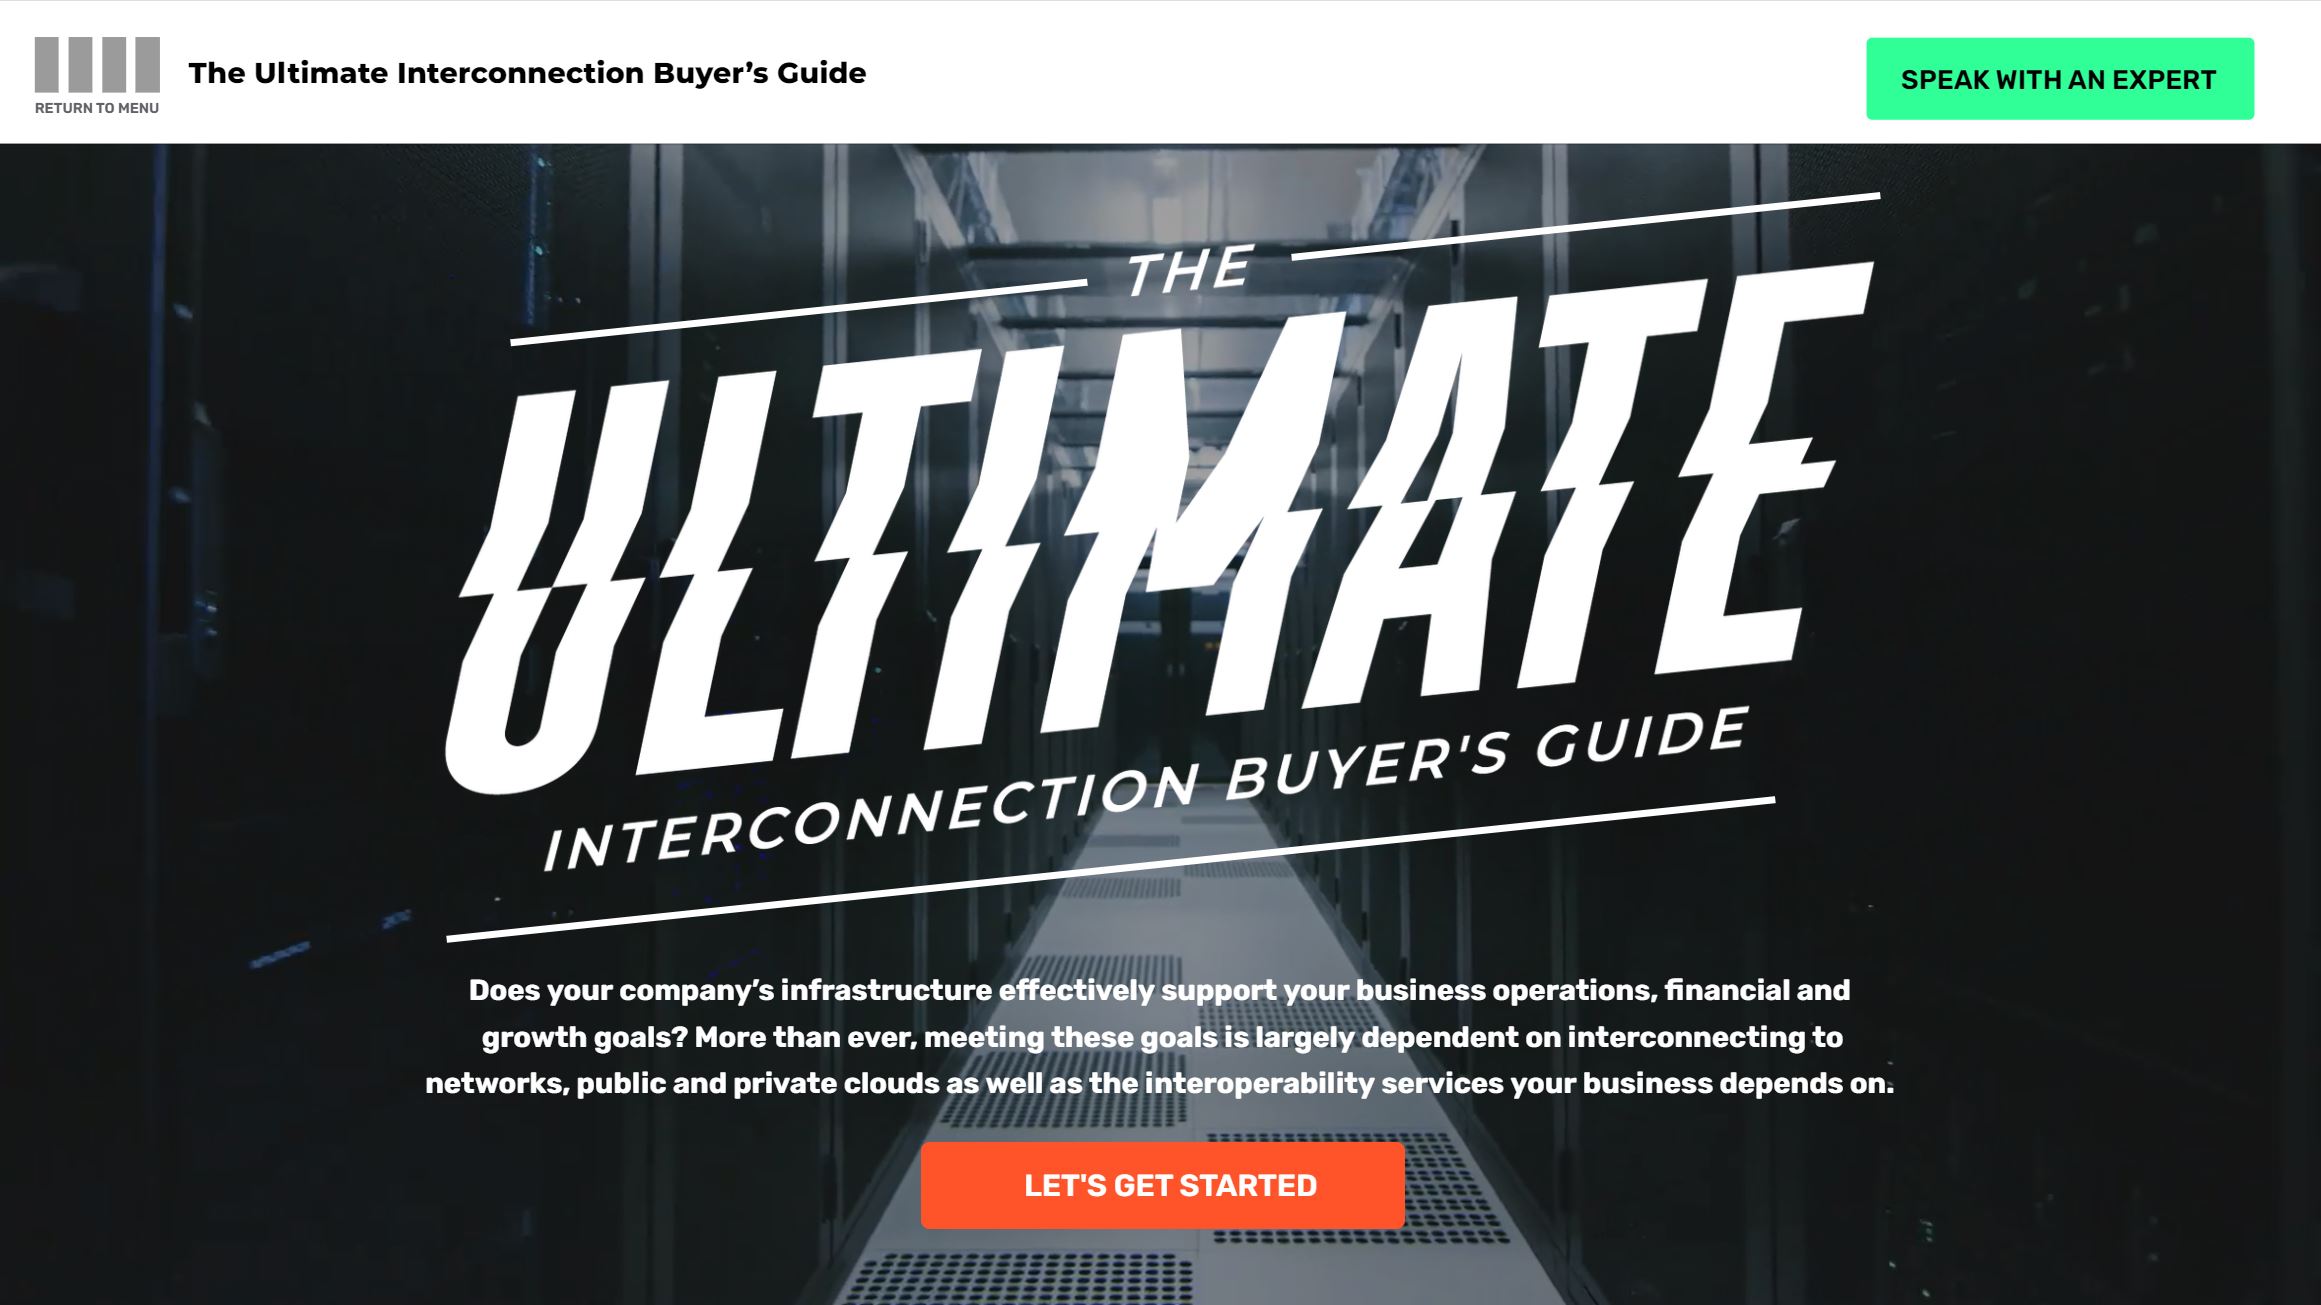 Image showing the cover of CoreSite interconnection buyer's guide